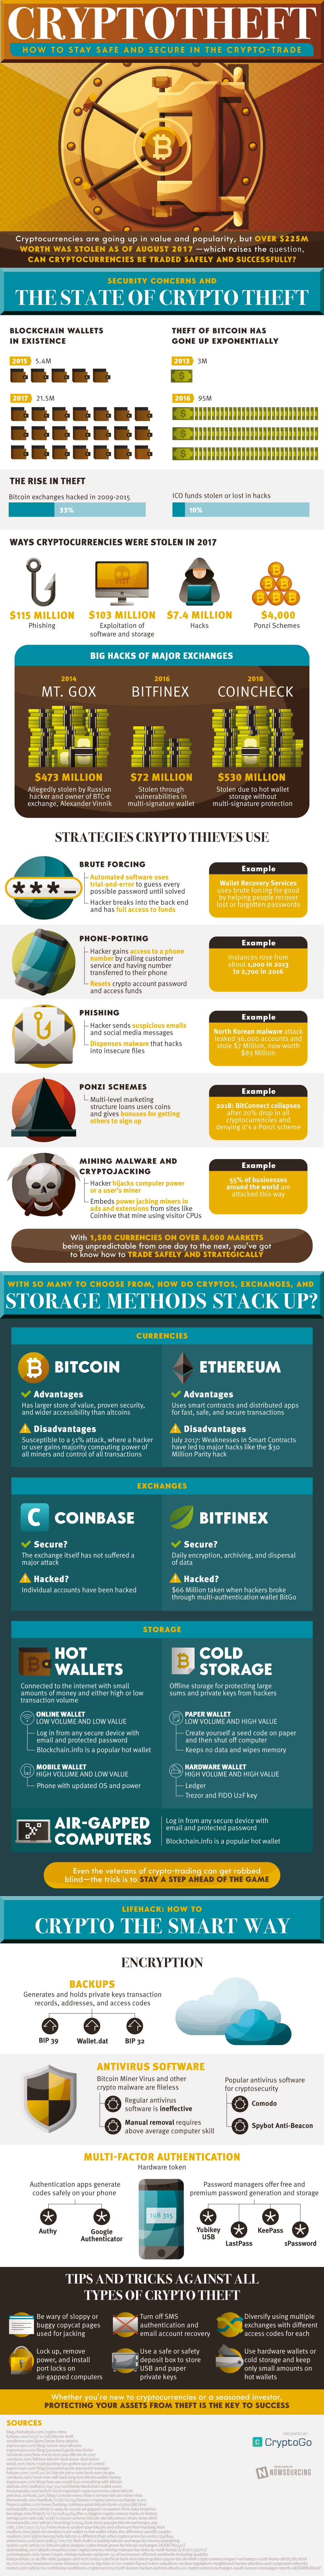 cryptocurrency theft infographic